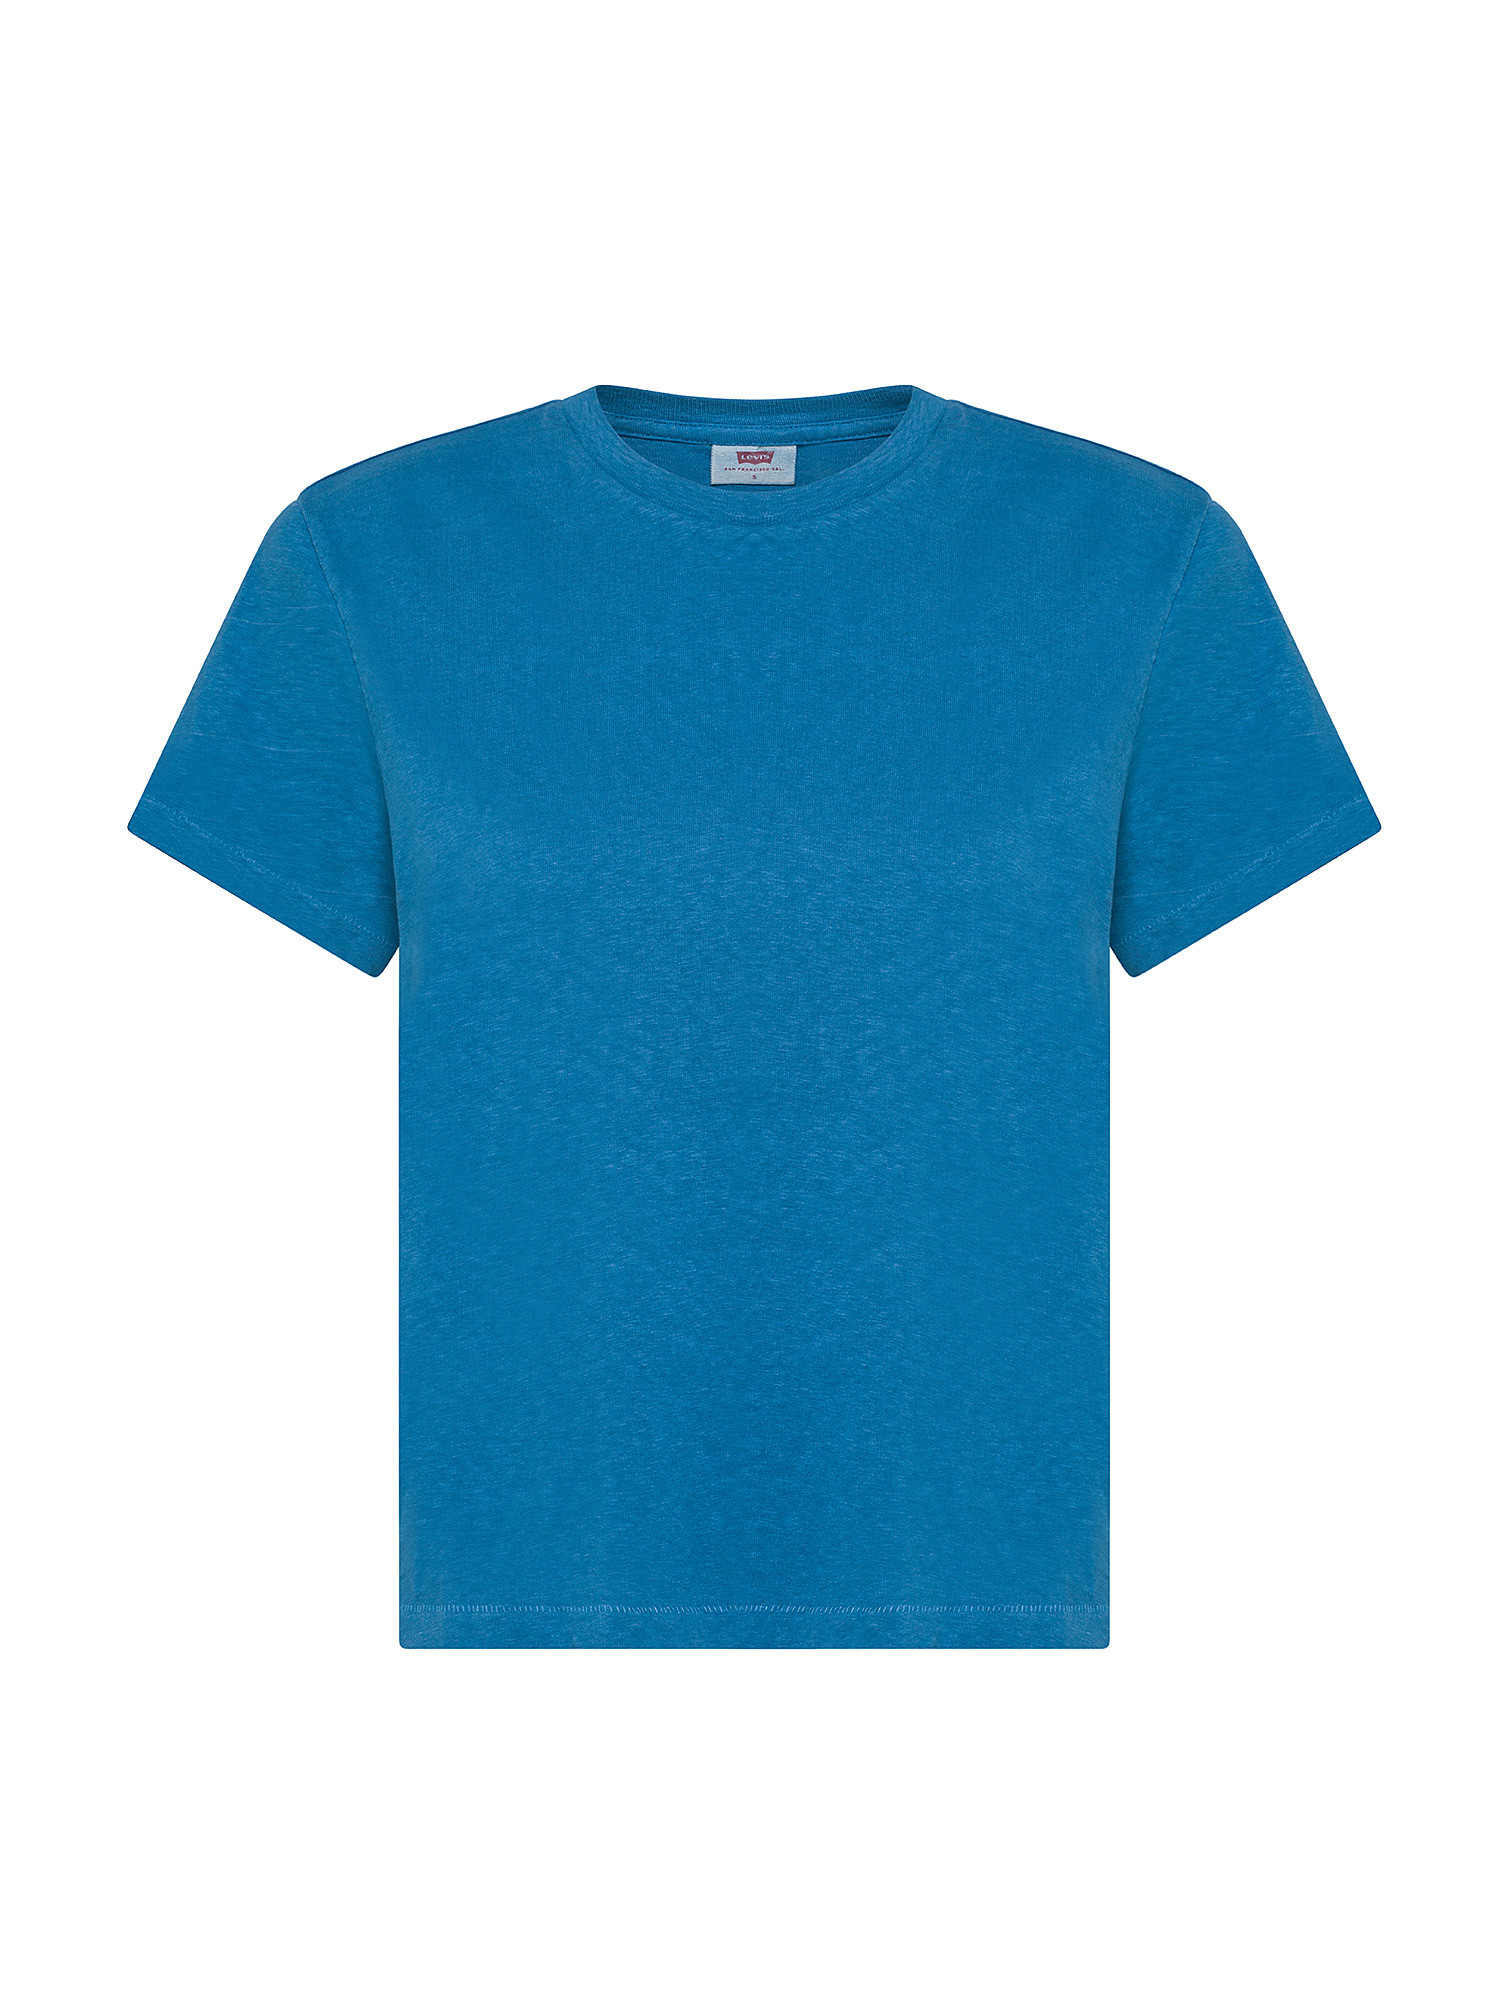 Levi's - T-shirt in cotone, Azzurro, large image number 0